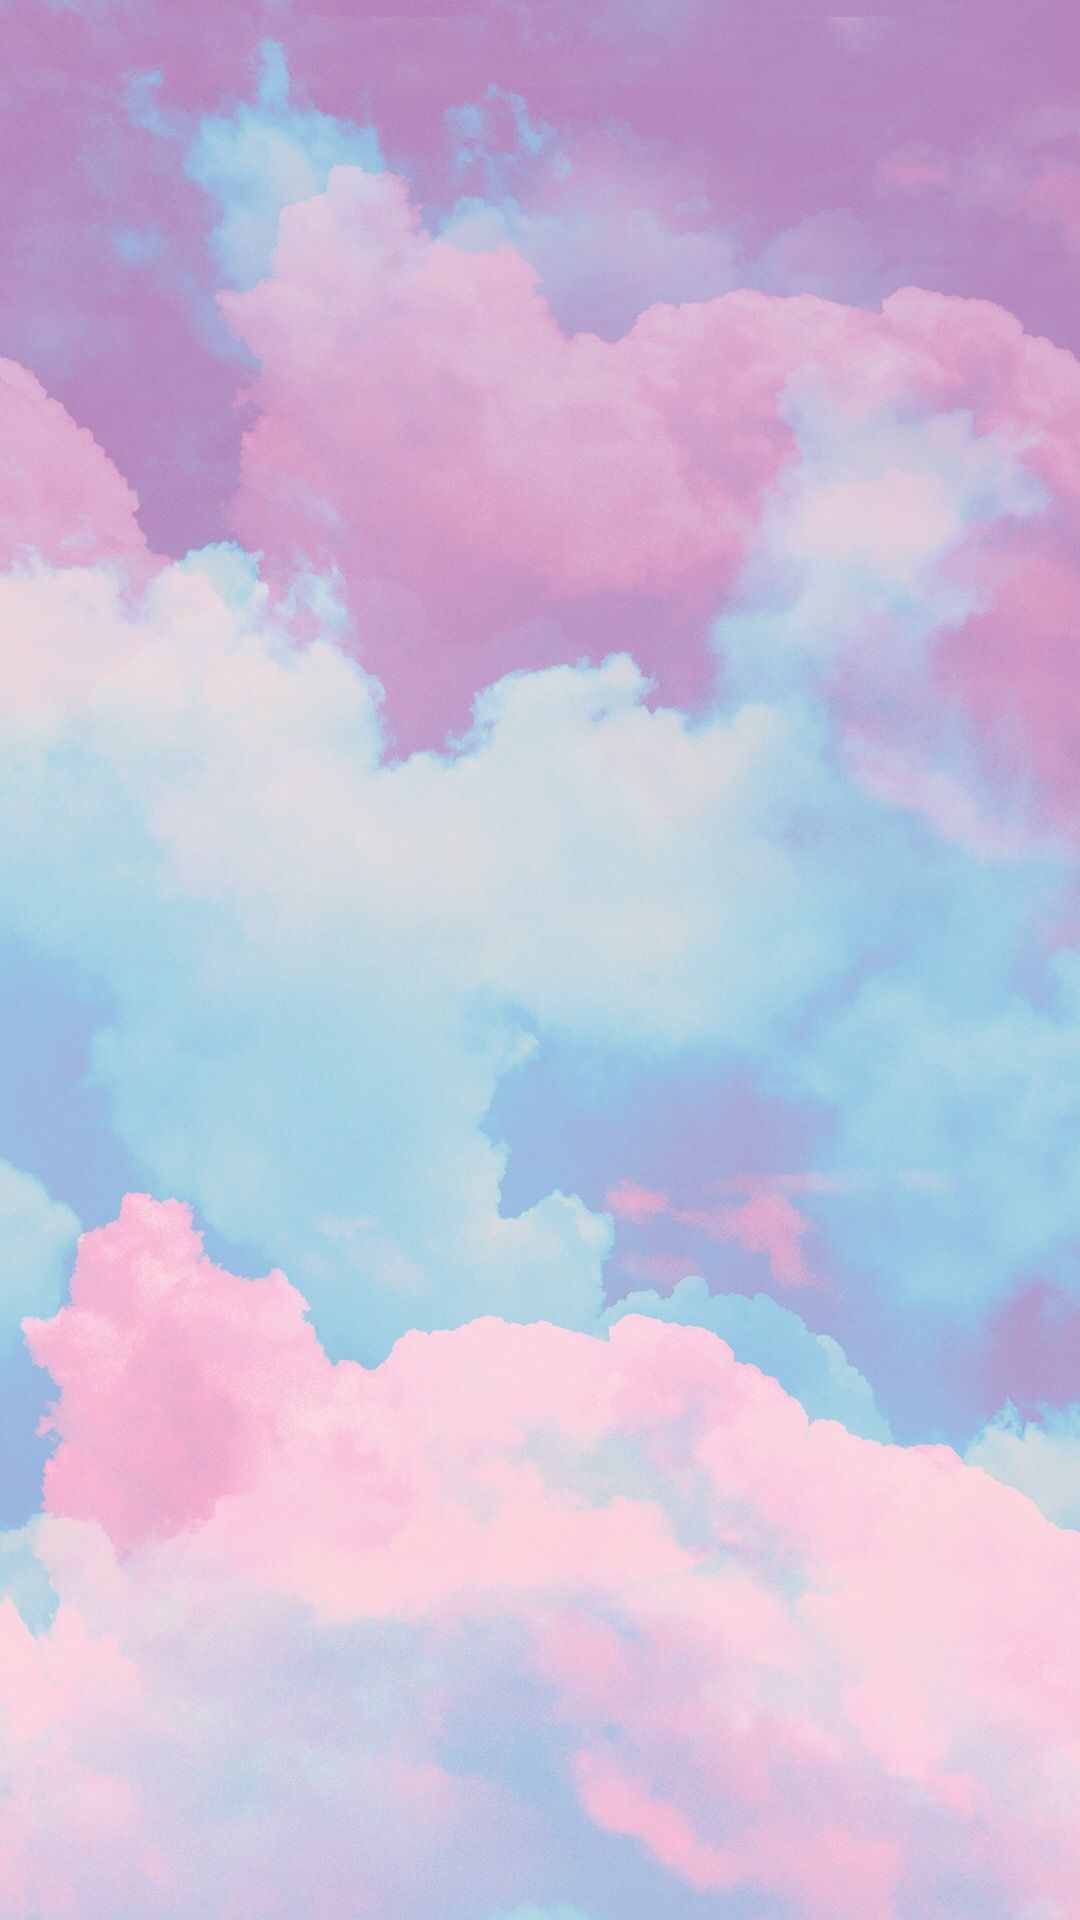 Pastel Colorful HD Wallpaper Android em 2020. Fundo